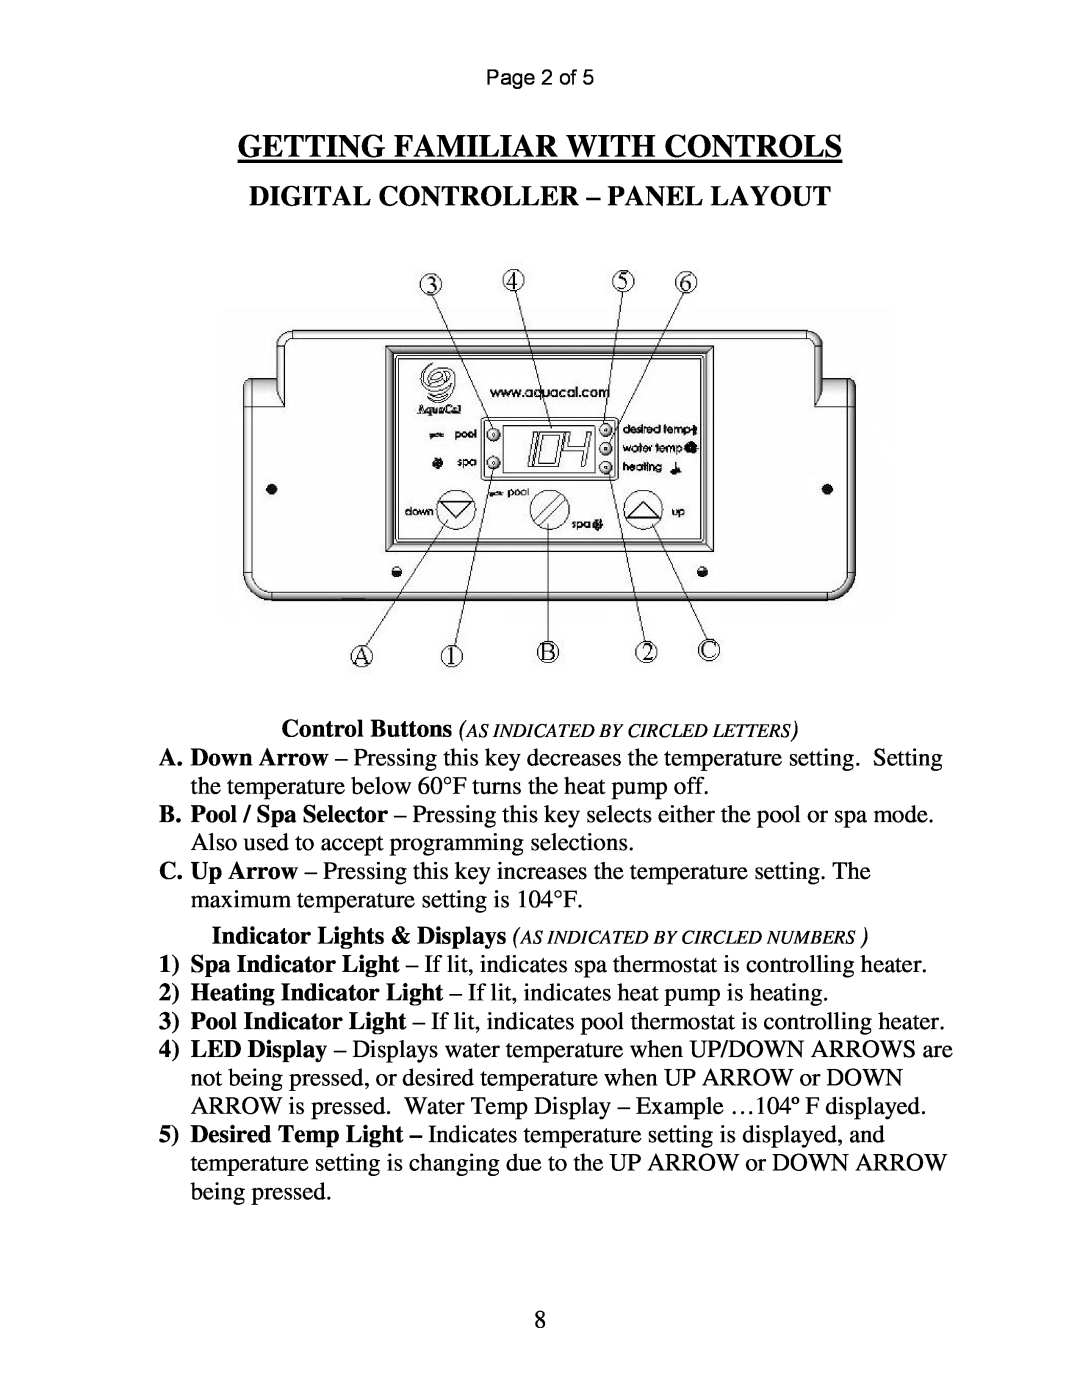 Aquacal 155, 120 owner manual Getting Familiar With Controls, Digital Controller – Panel Layout 